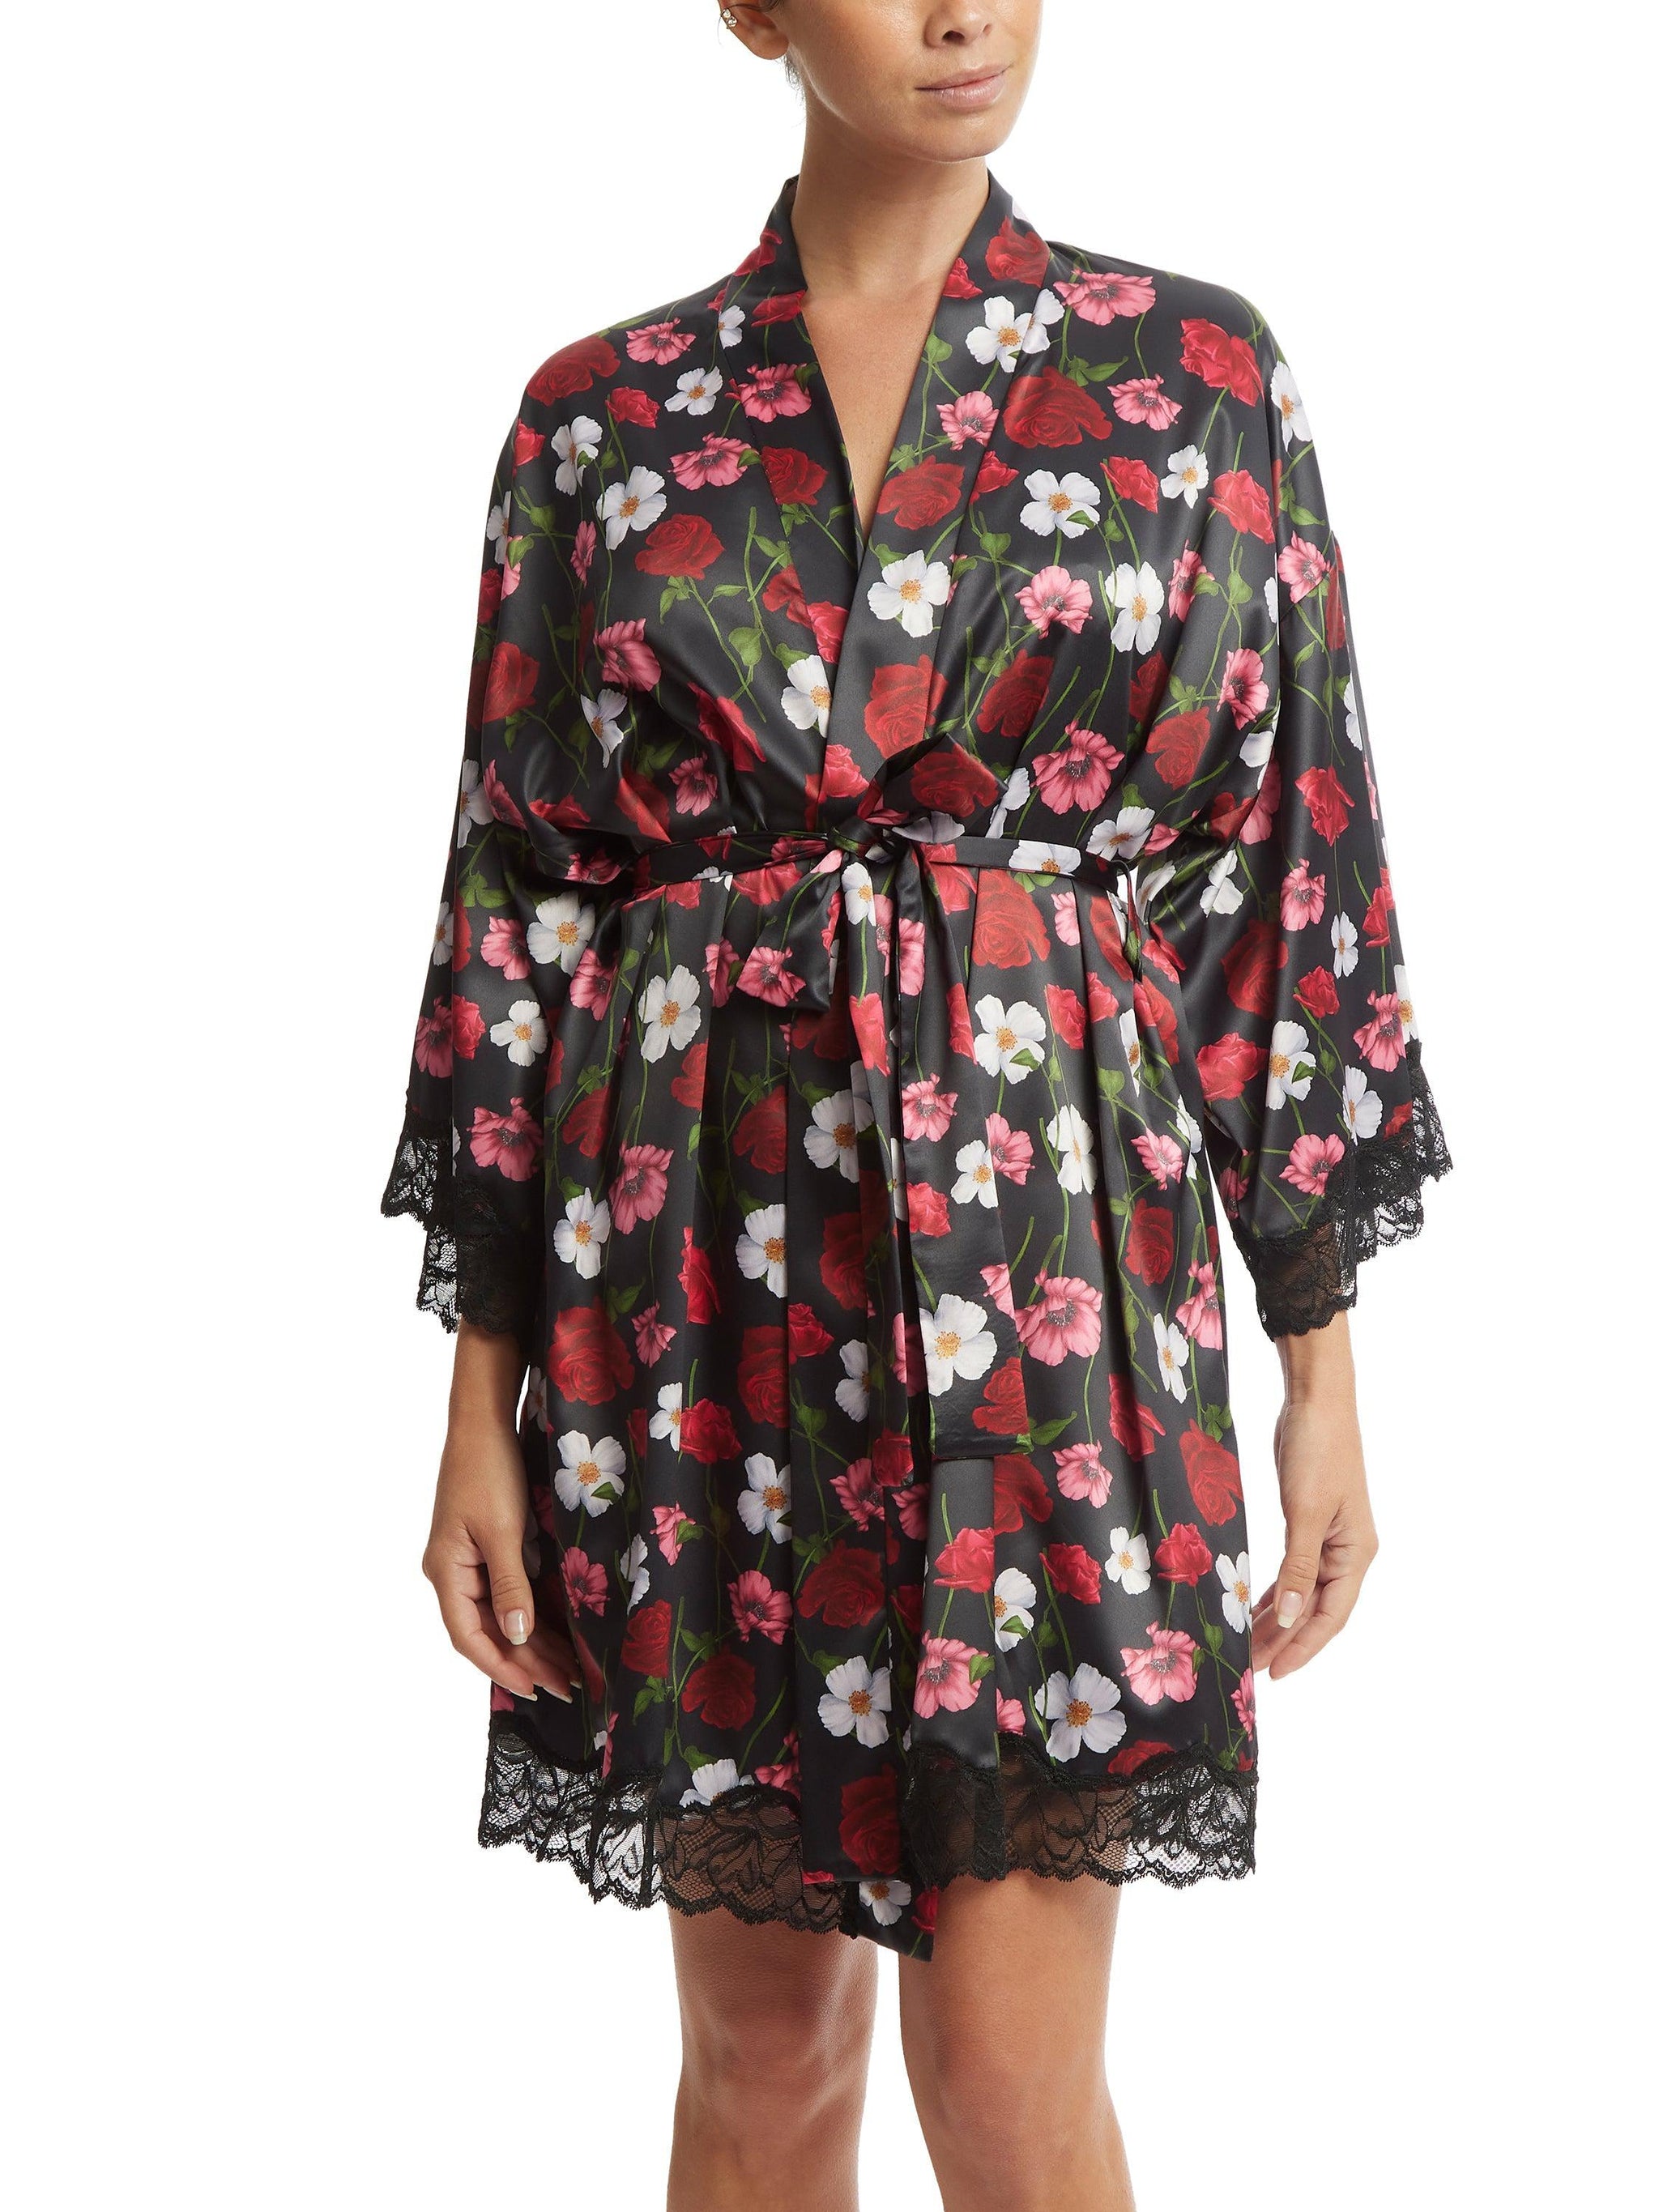 Luxe Satin Robe Am I Dreaming Sale